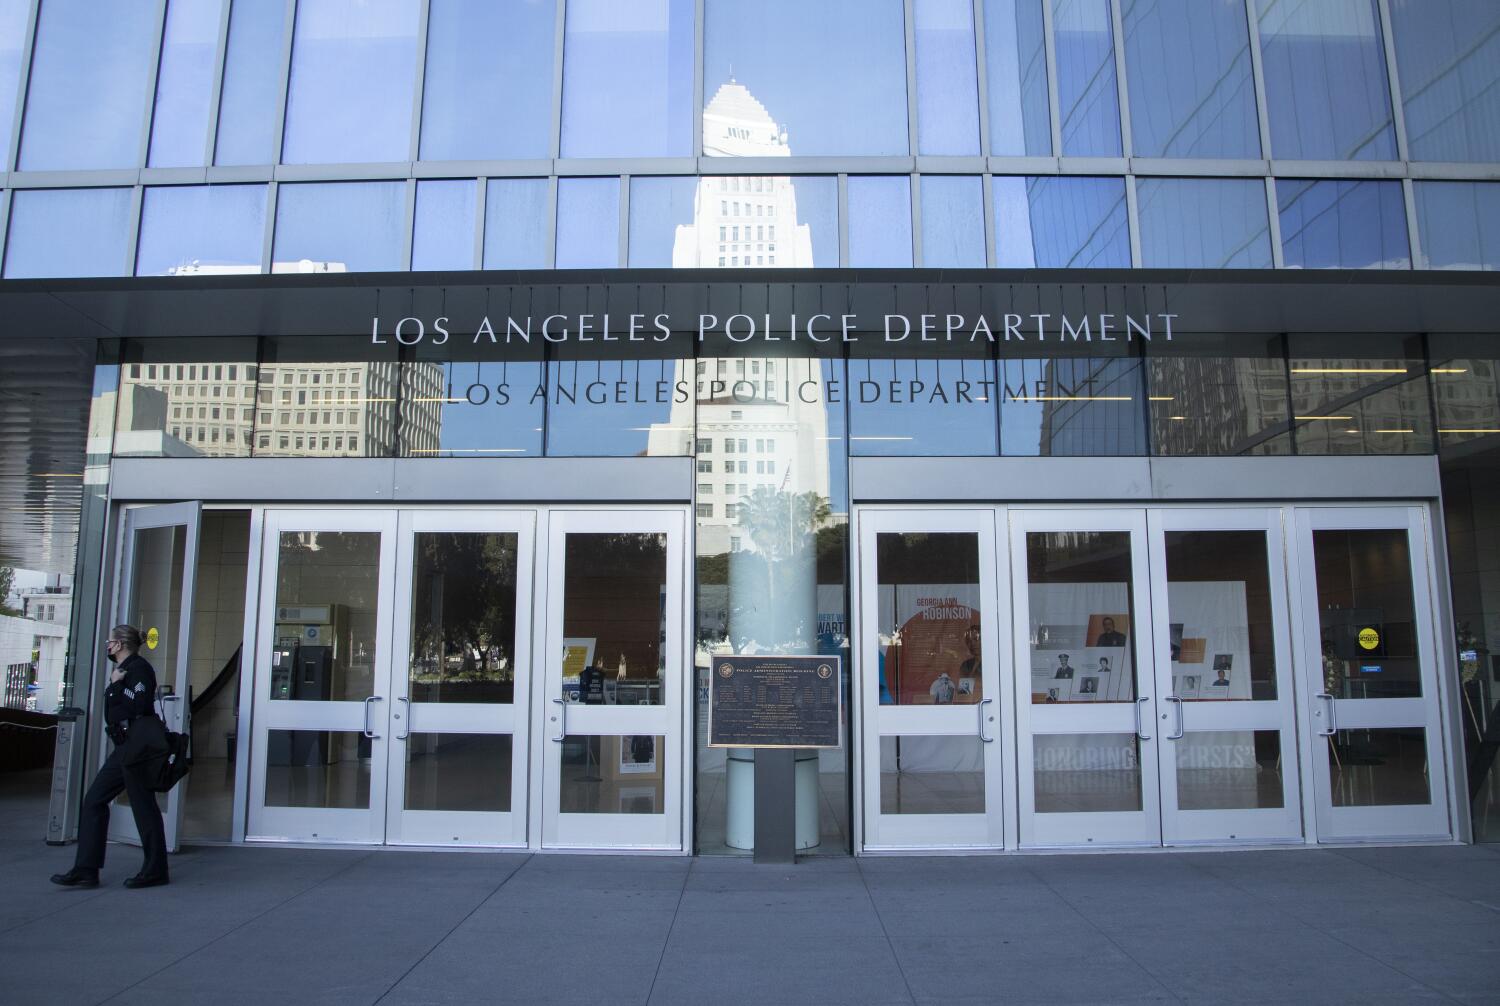 lapd-website-goes-offline;-officials-give-no-cause-but-say-it’s-‘not-ransomware’